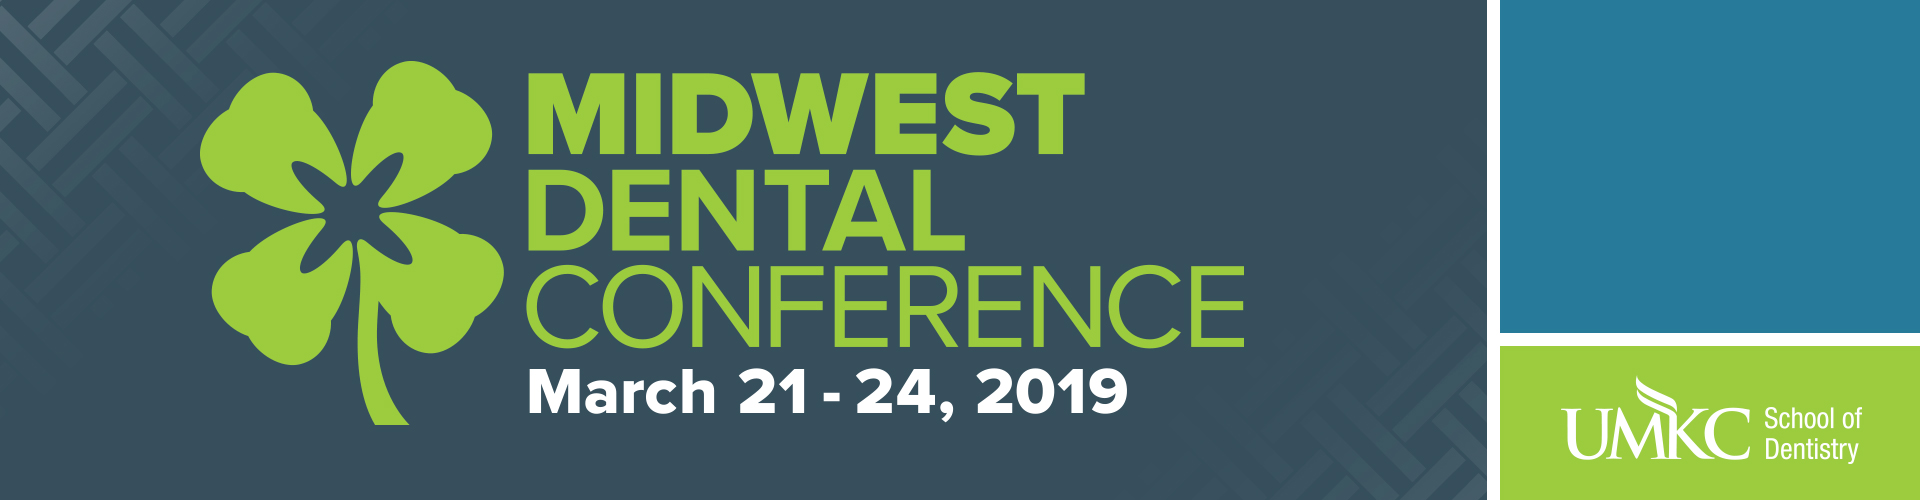 2019 Midwest Dental Conference Attendee Handouts School of Dentistry